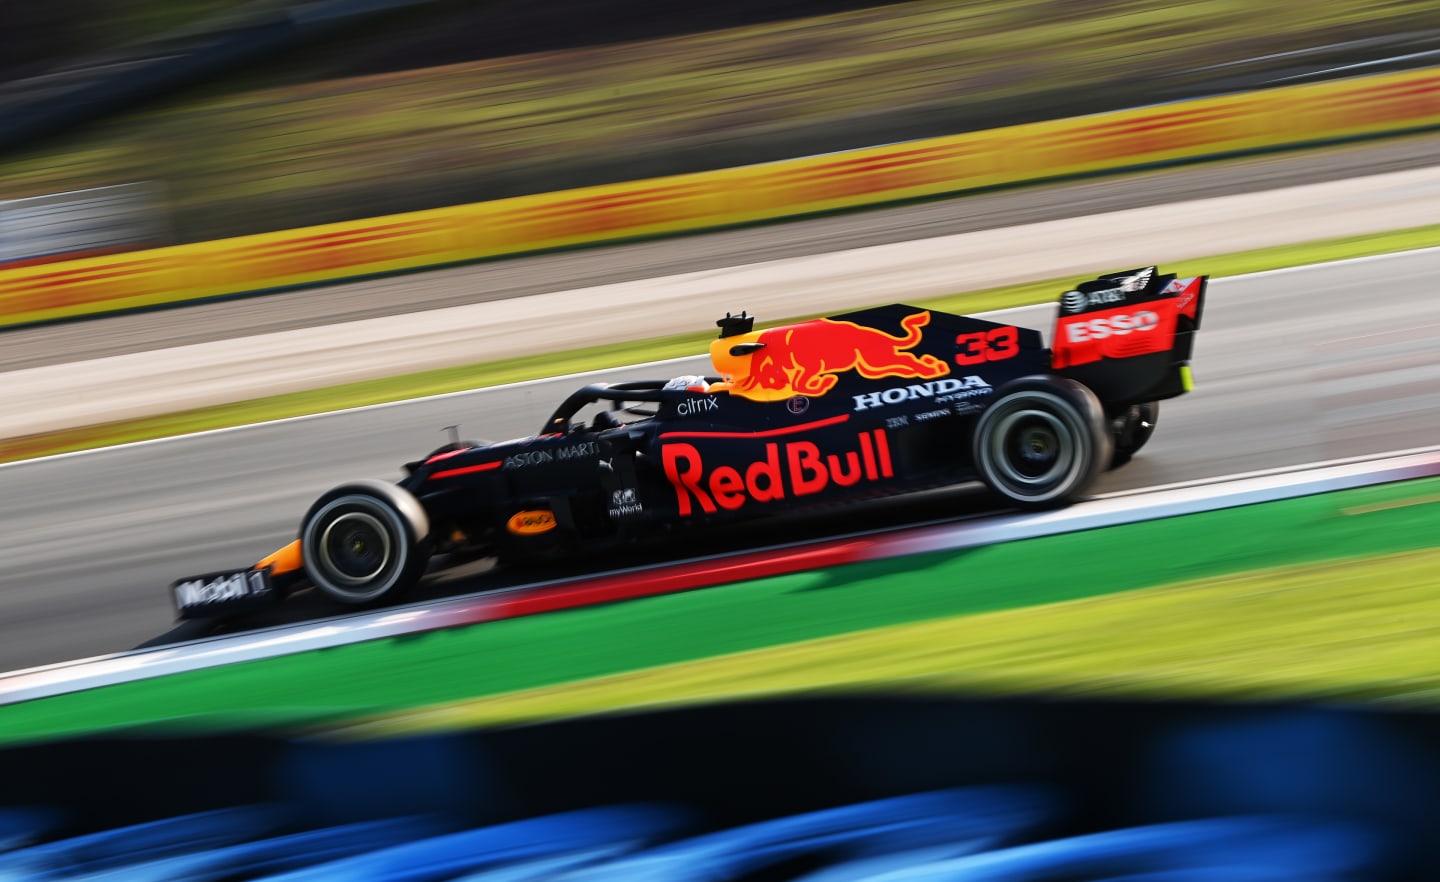 ISTANBUL, TURKEY - NOVEMBER 13: Max Verstappen of the Netherlands driving the (33) Aston Martin Red